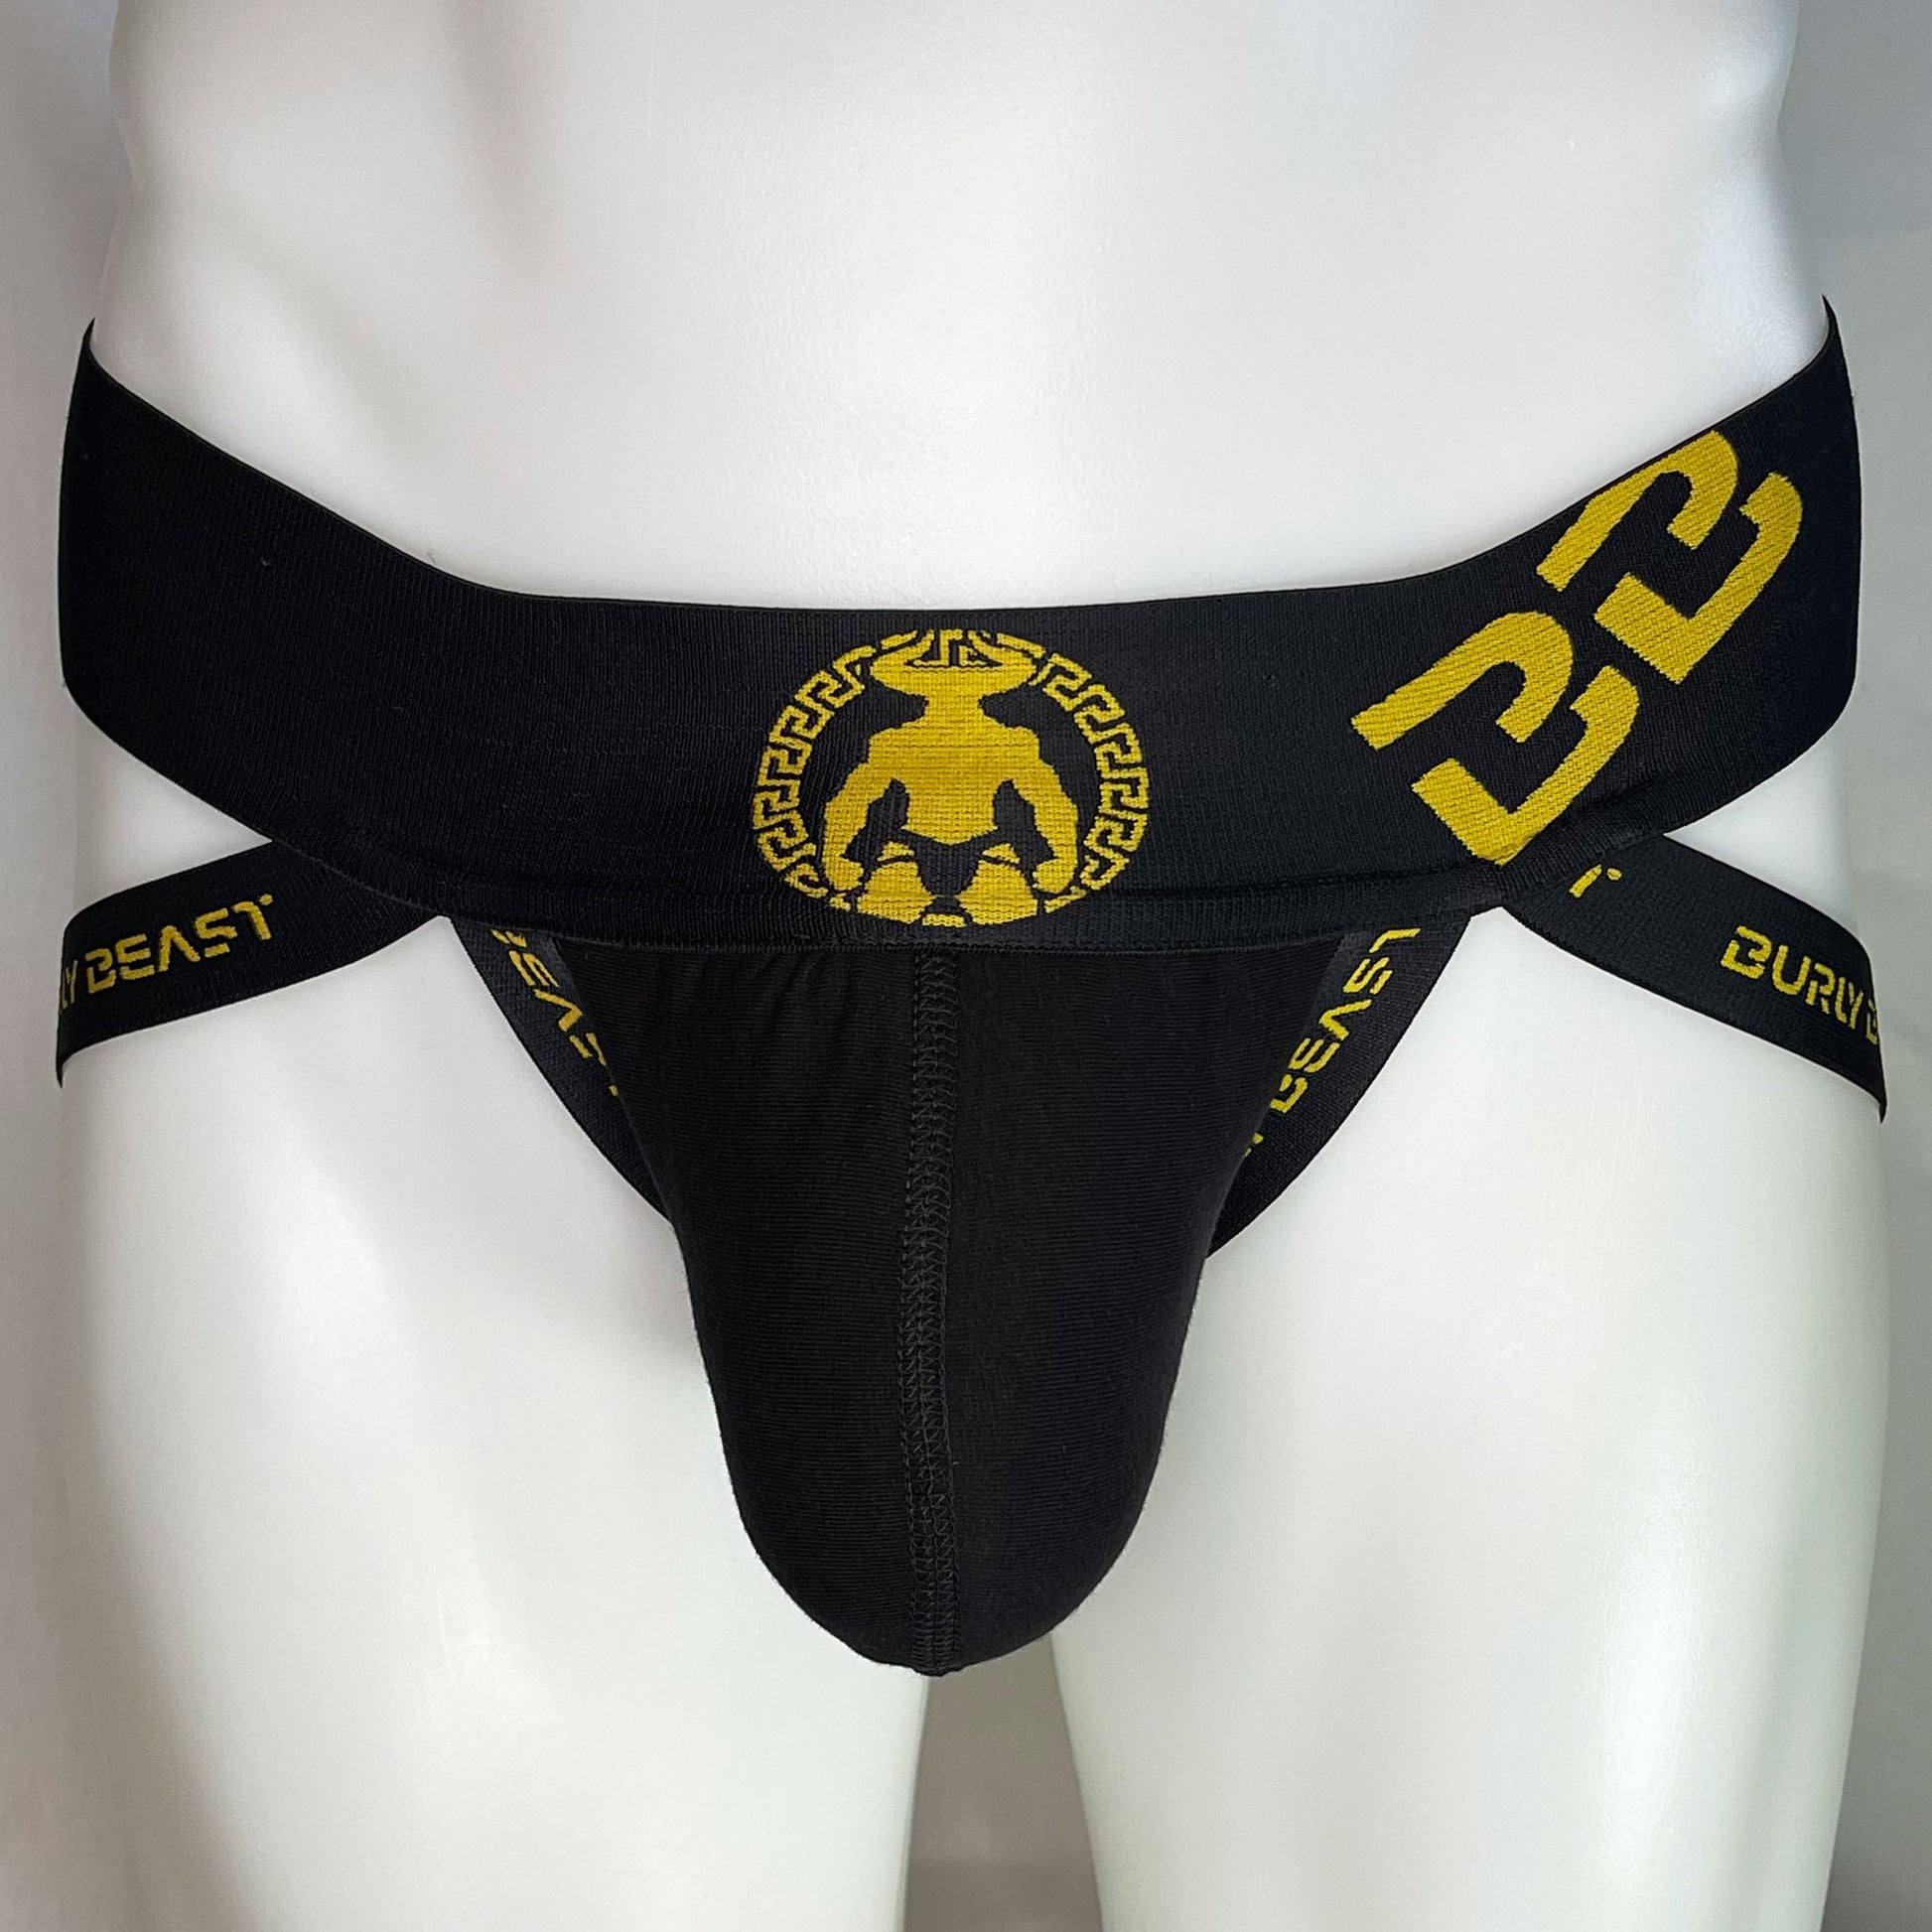 SuperFit Jock Strap Black - in support of The Trevor Project